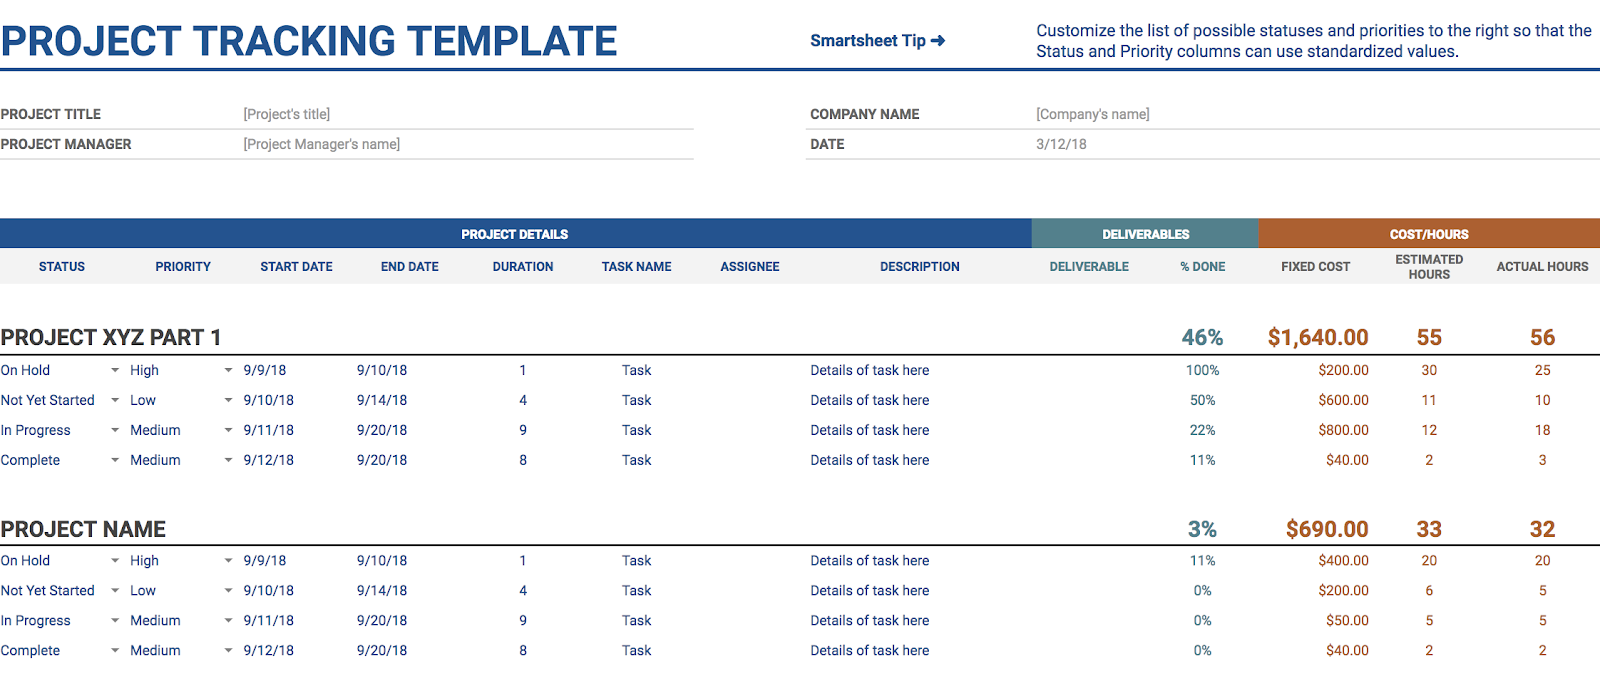 11 Of The Best Free Google Sheets Templates For 2020 - Marketing - Mind ...